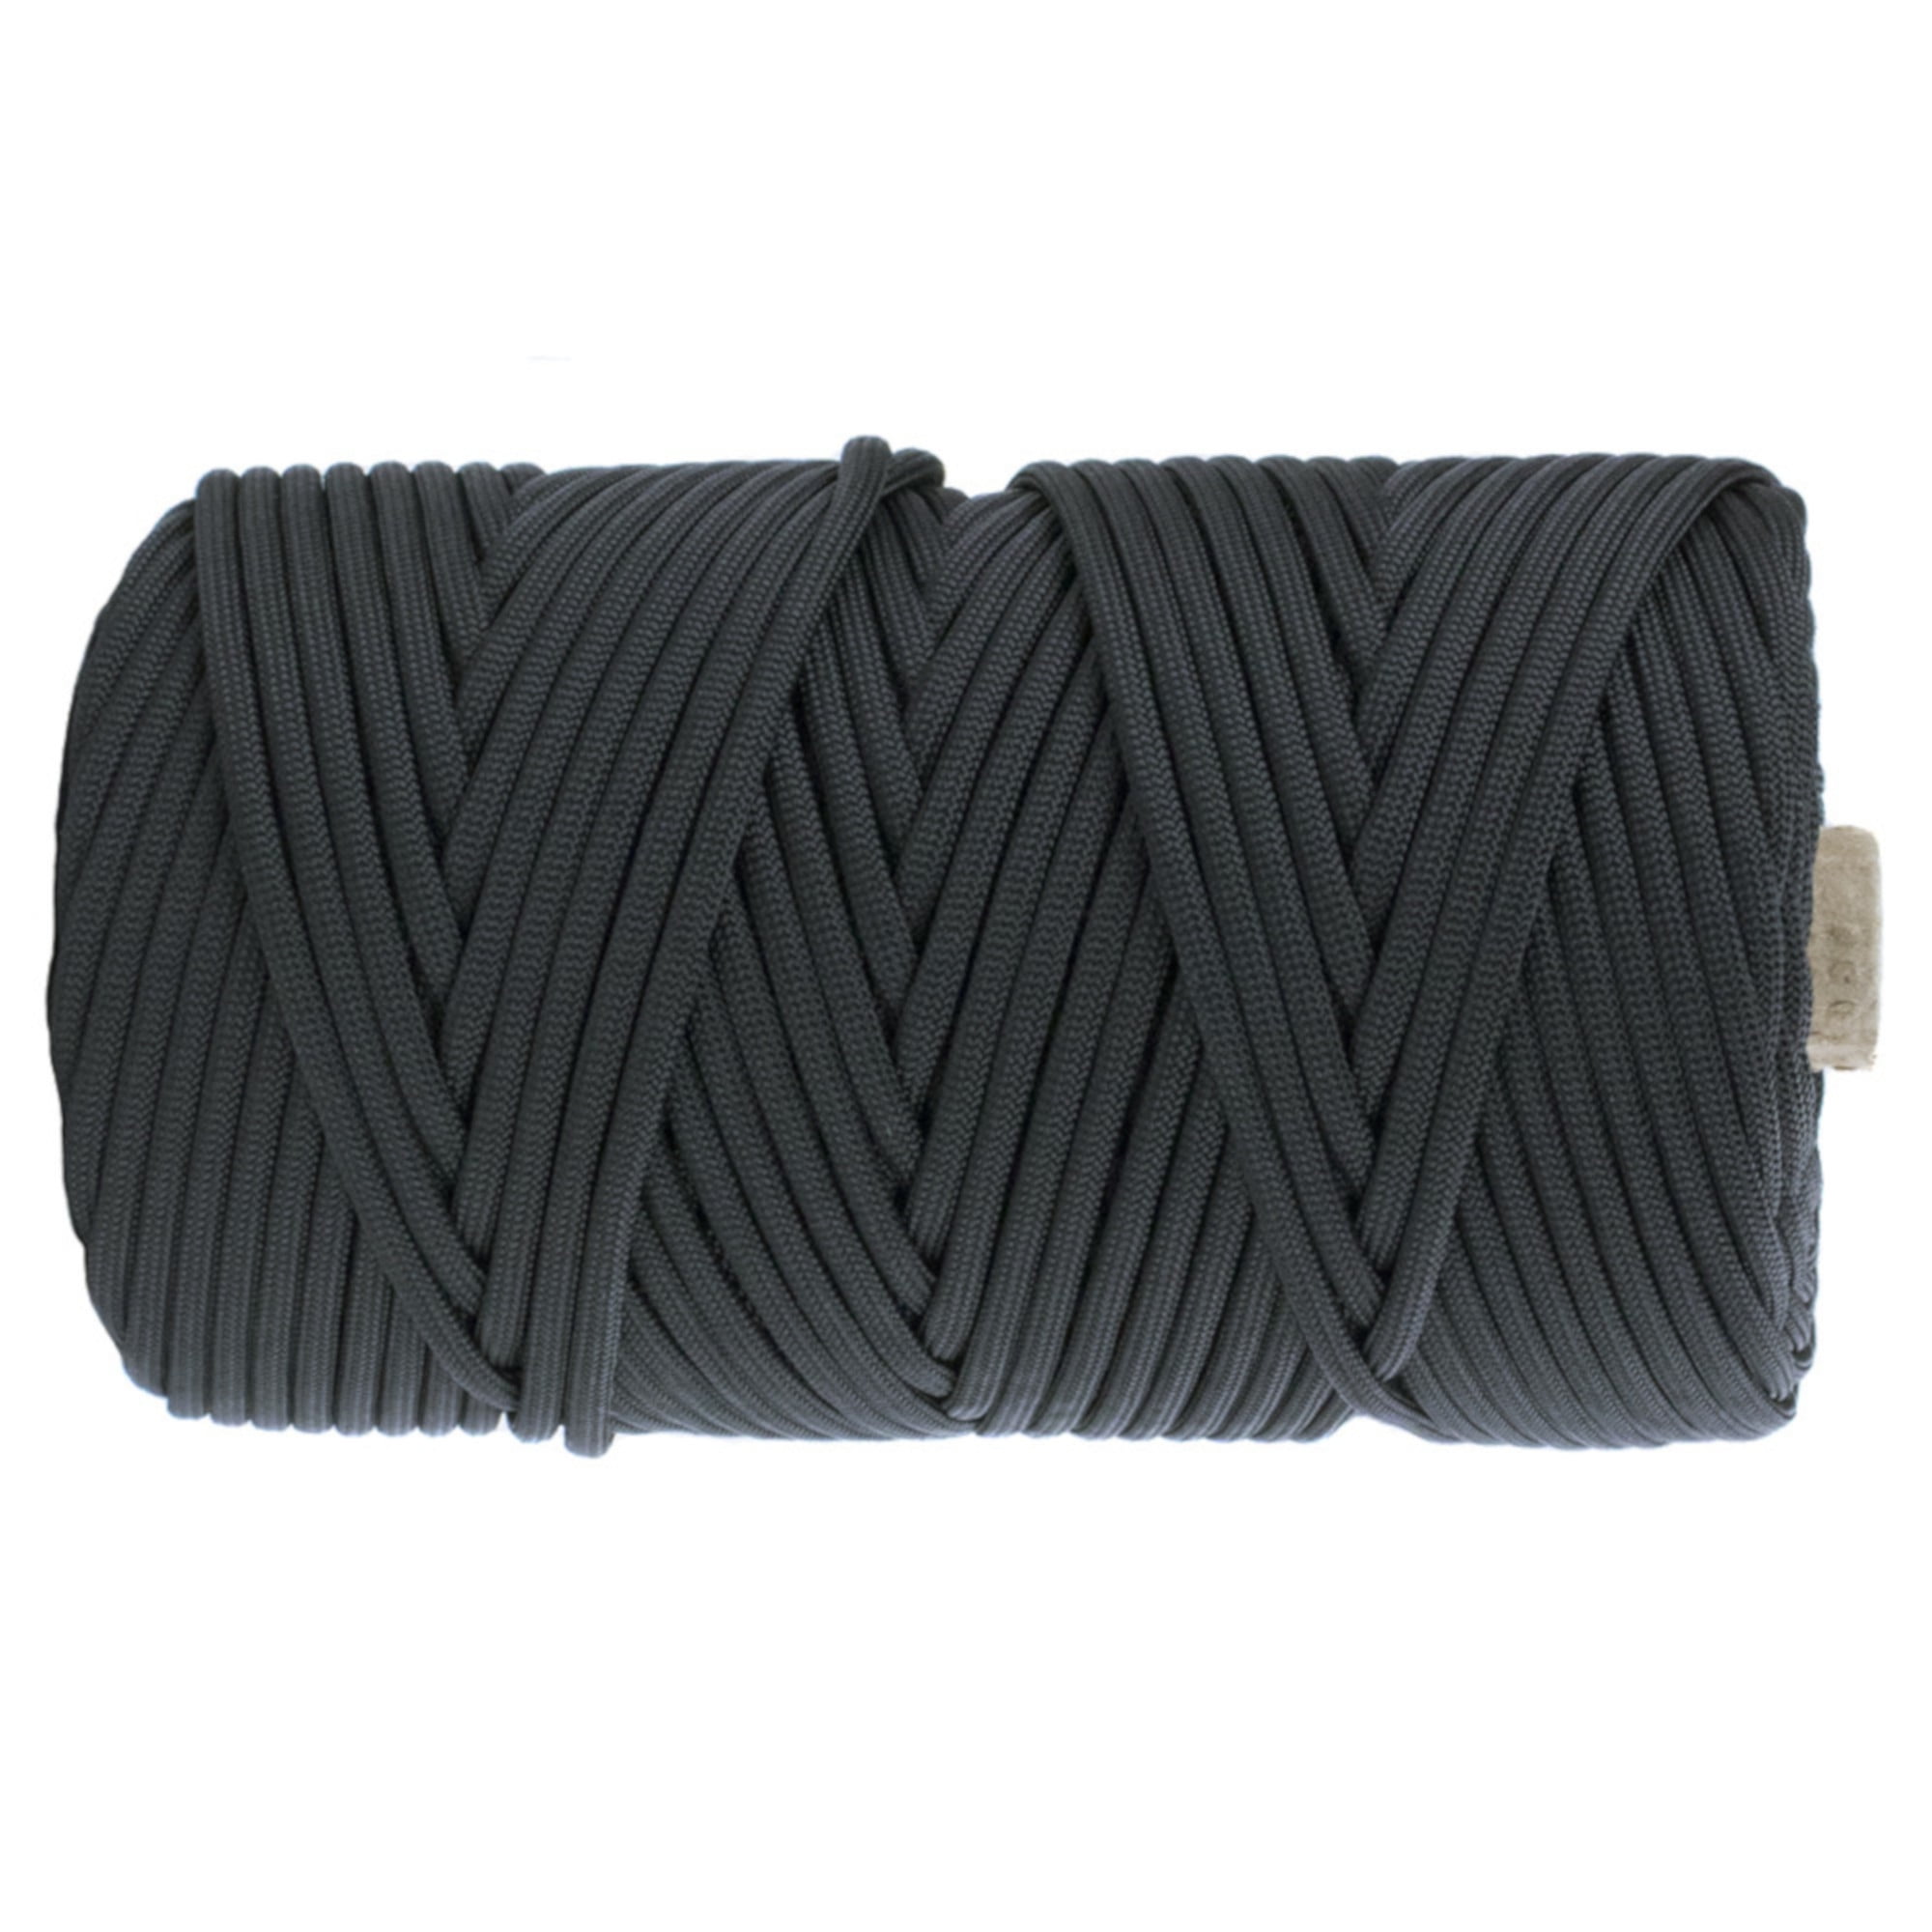 GOLBERG Paracord Mil Spec Type III 7 Strand Parachute Commercial Grade